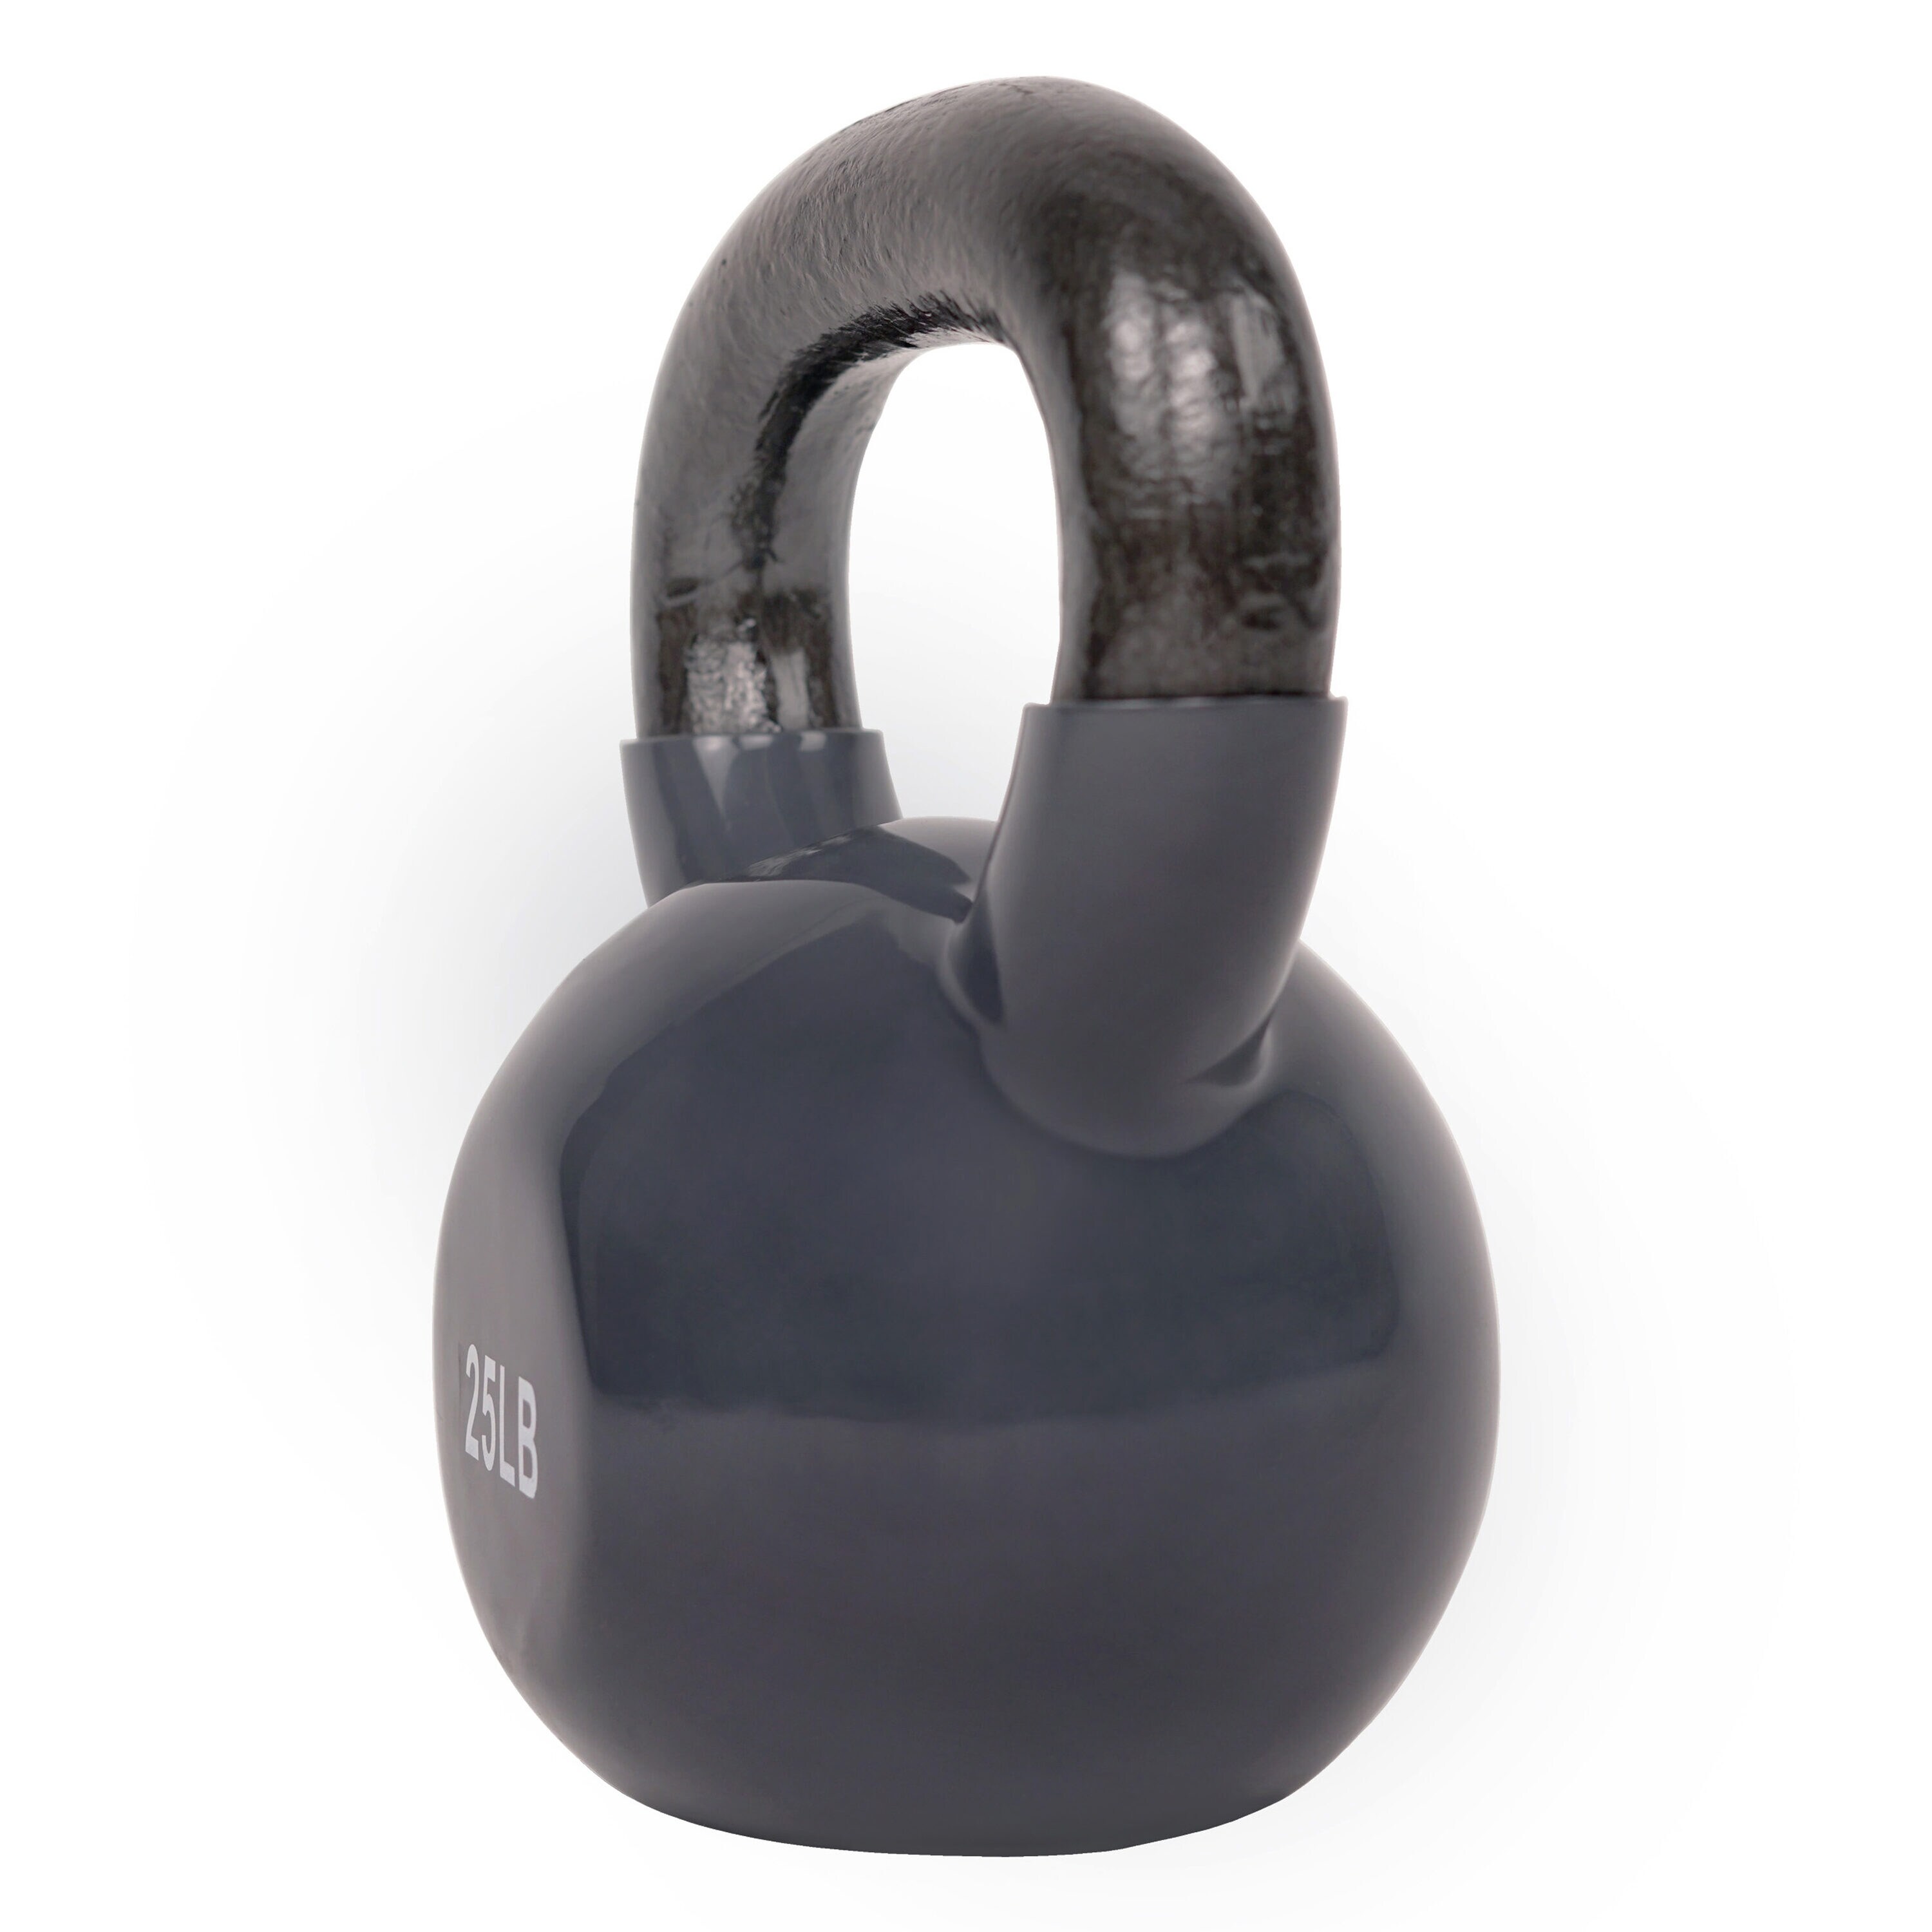 Sunny Health & Fitness 5 lbs. Pink Vinyl Coated Cast Iron Kettlebell -  Fixed-weight Kettlebell for Full Body Workout, Portable and Durable in the  Kettlebells department at